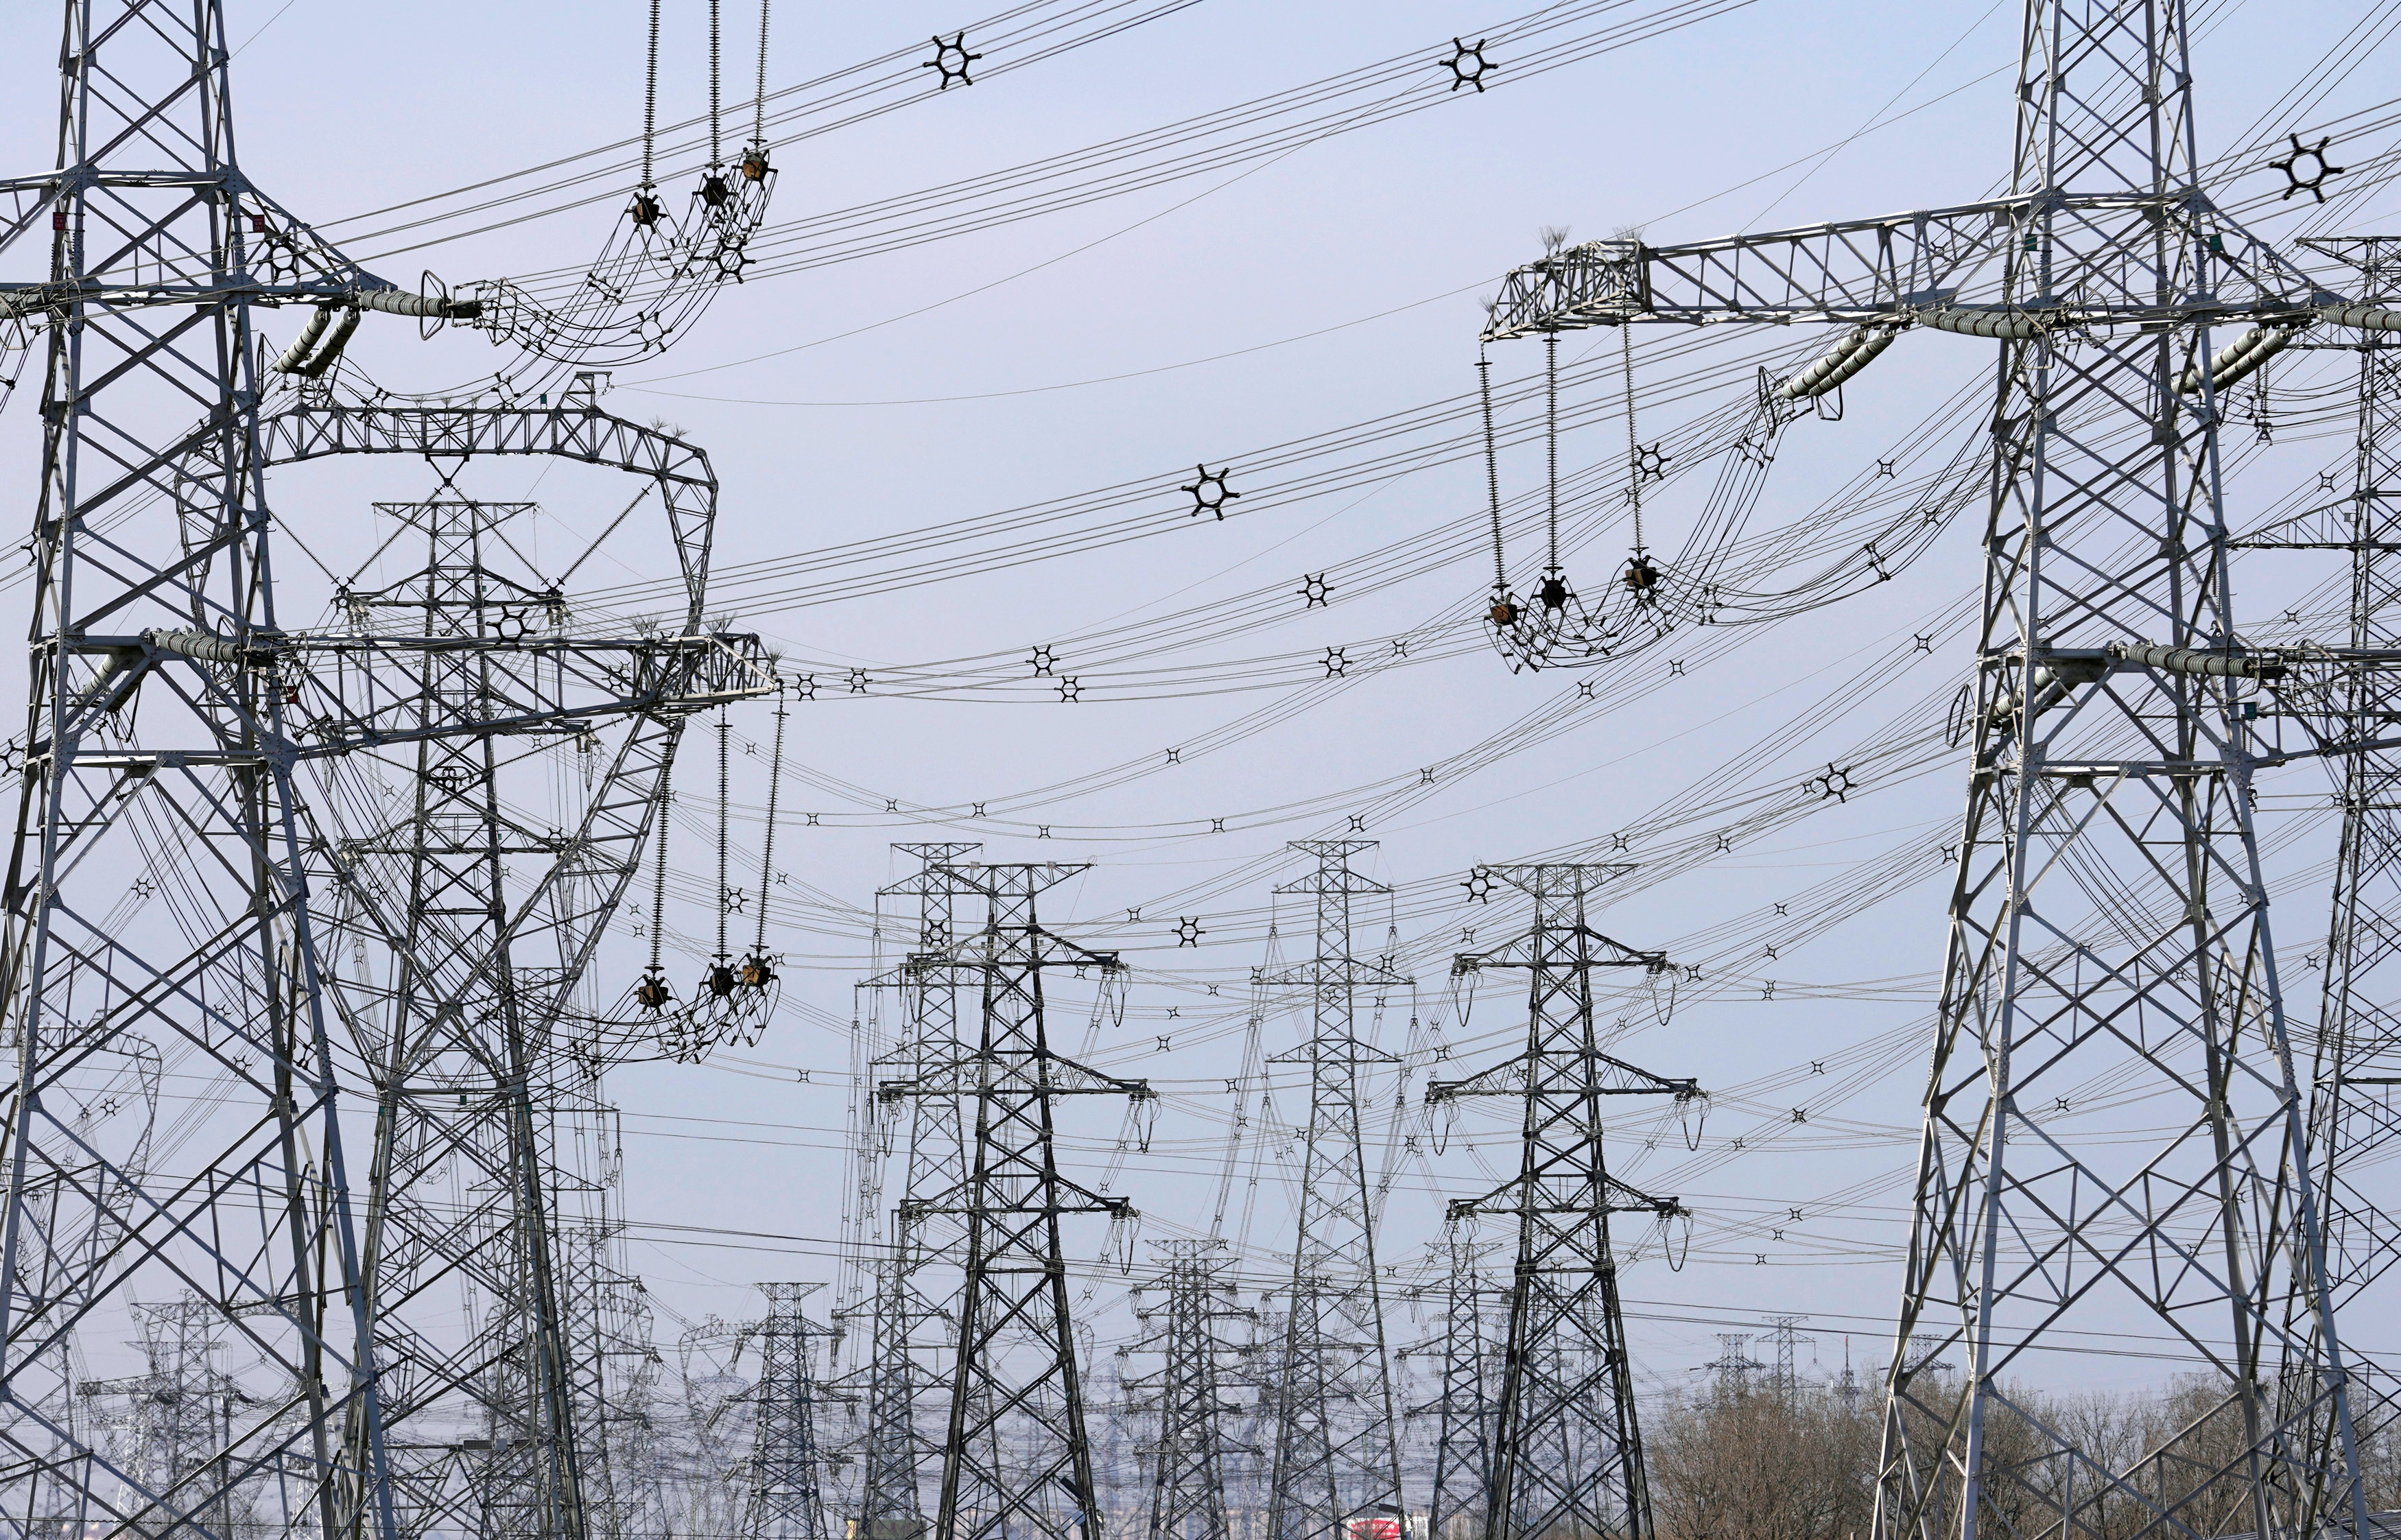 Power lines are seen along a highway on the outskirts of Beijing, China February 3, 2018. Picture taken February 3, 2018. REUTERS/Jason Lee/Files